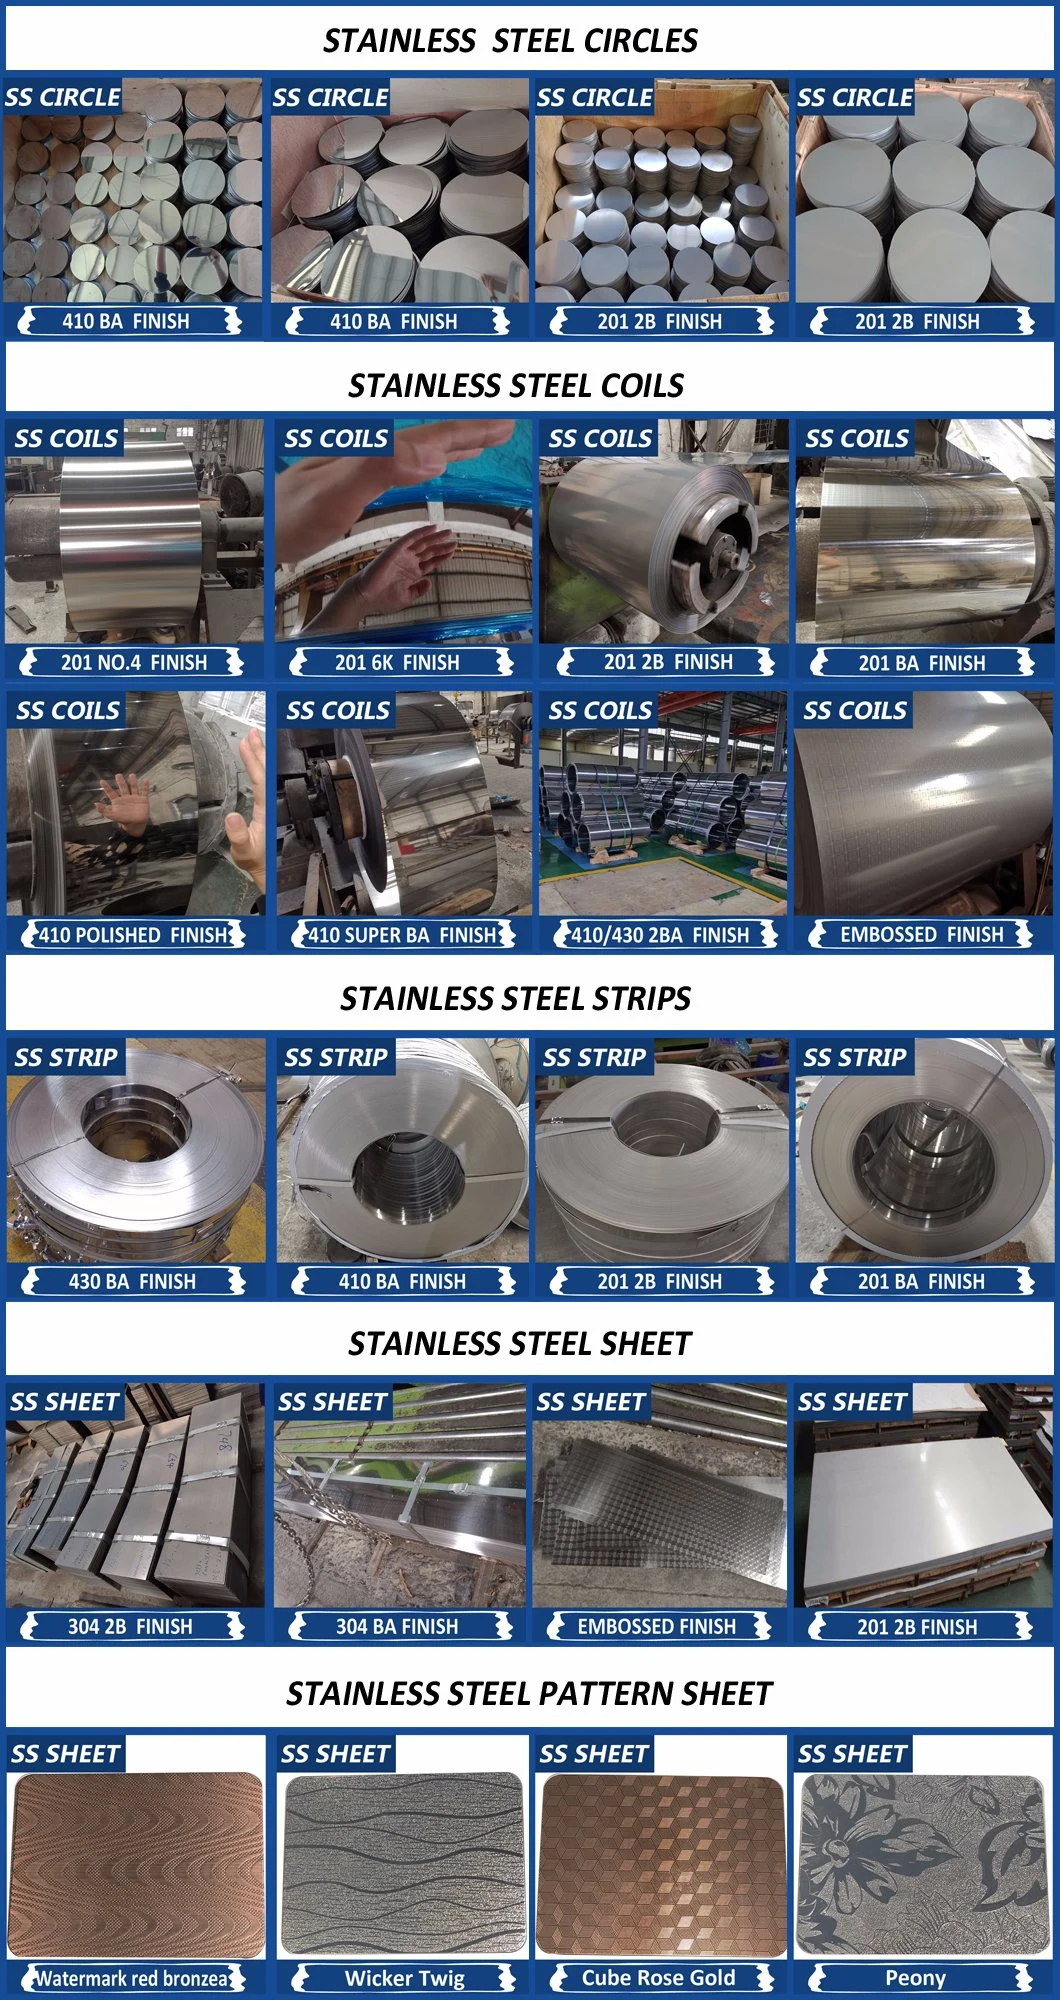 Cold Rolled Stainless Steel Sheets Circles Tableware Material